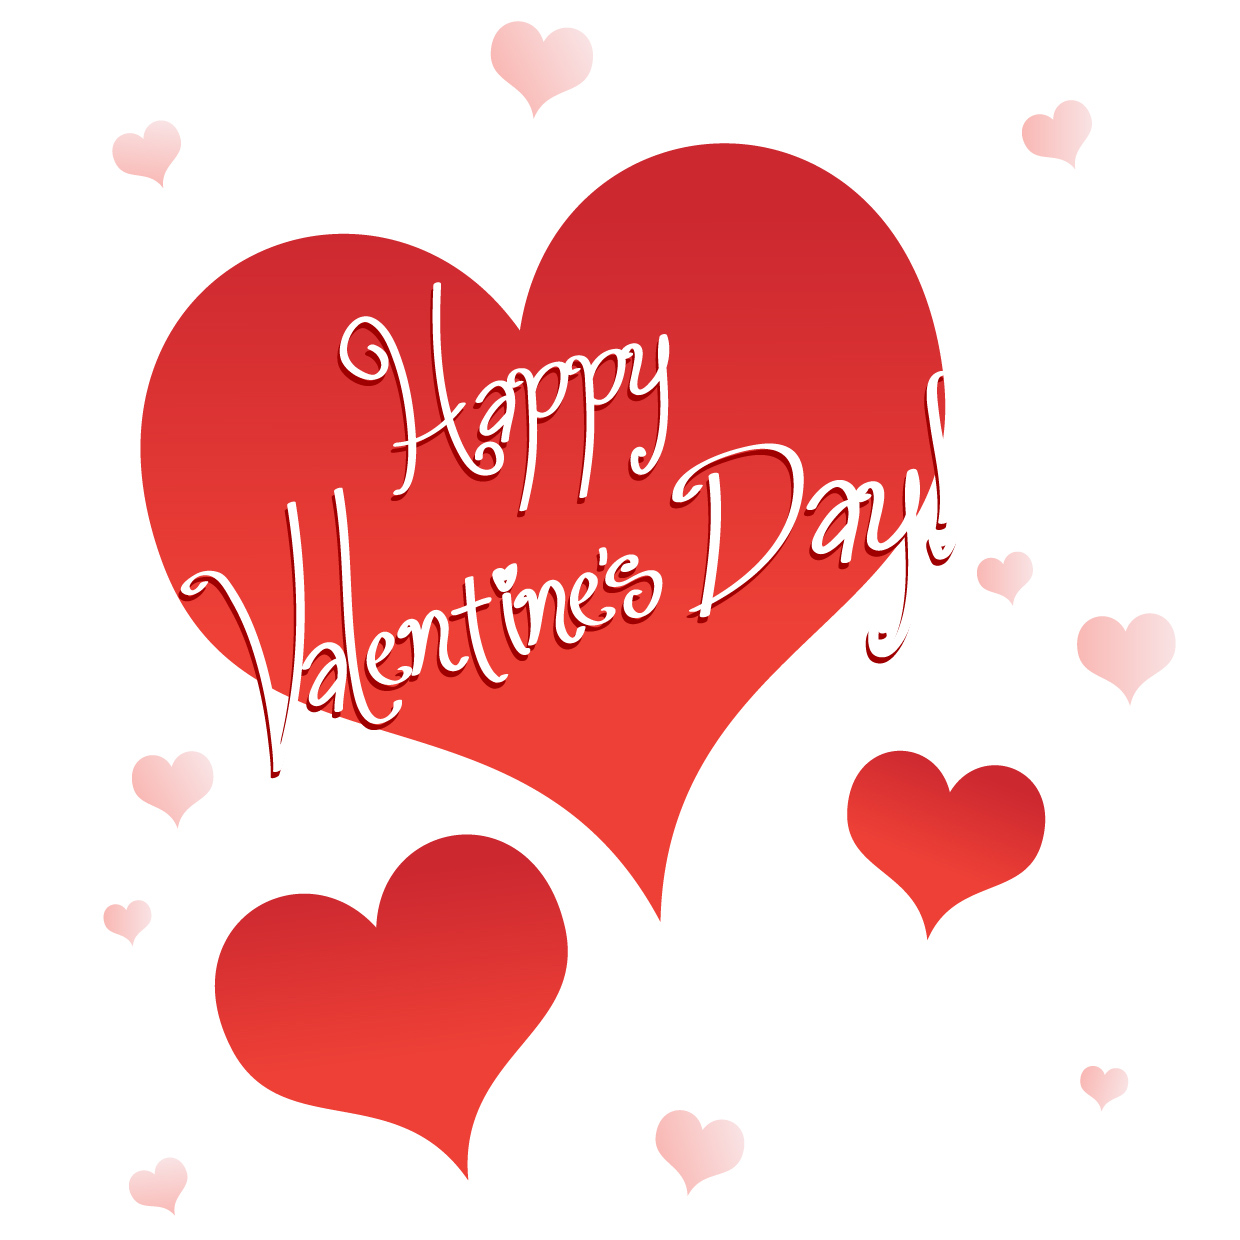 Free Clipart Valentines Day & Valentines Day Clip Art Images.